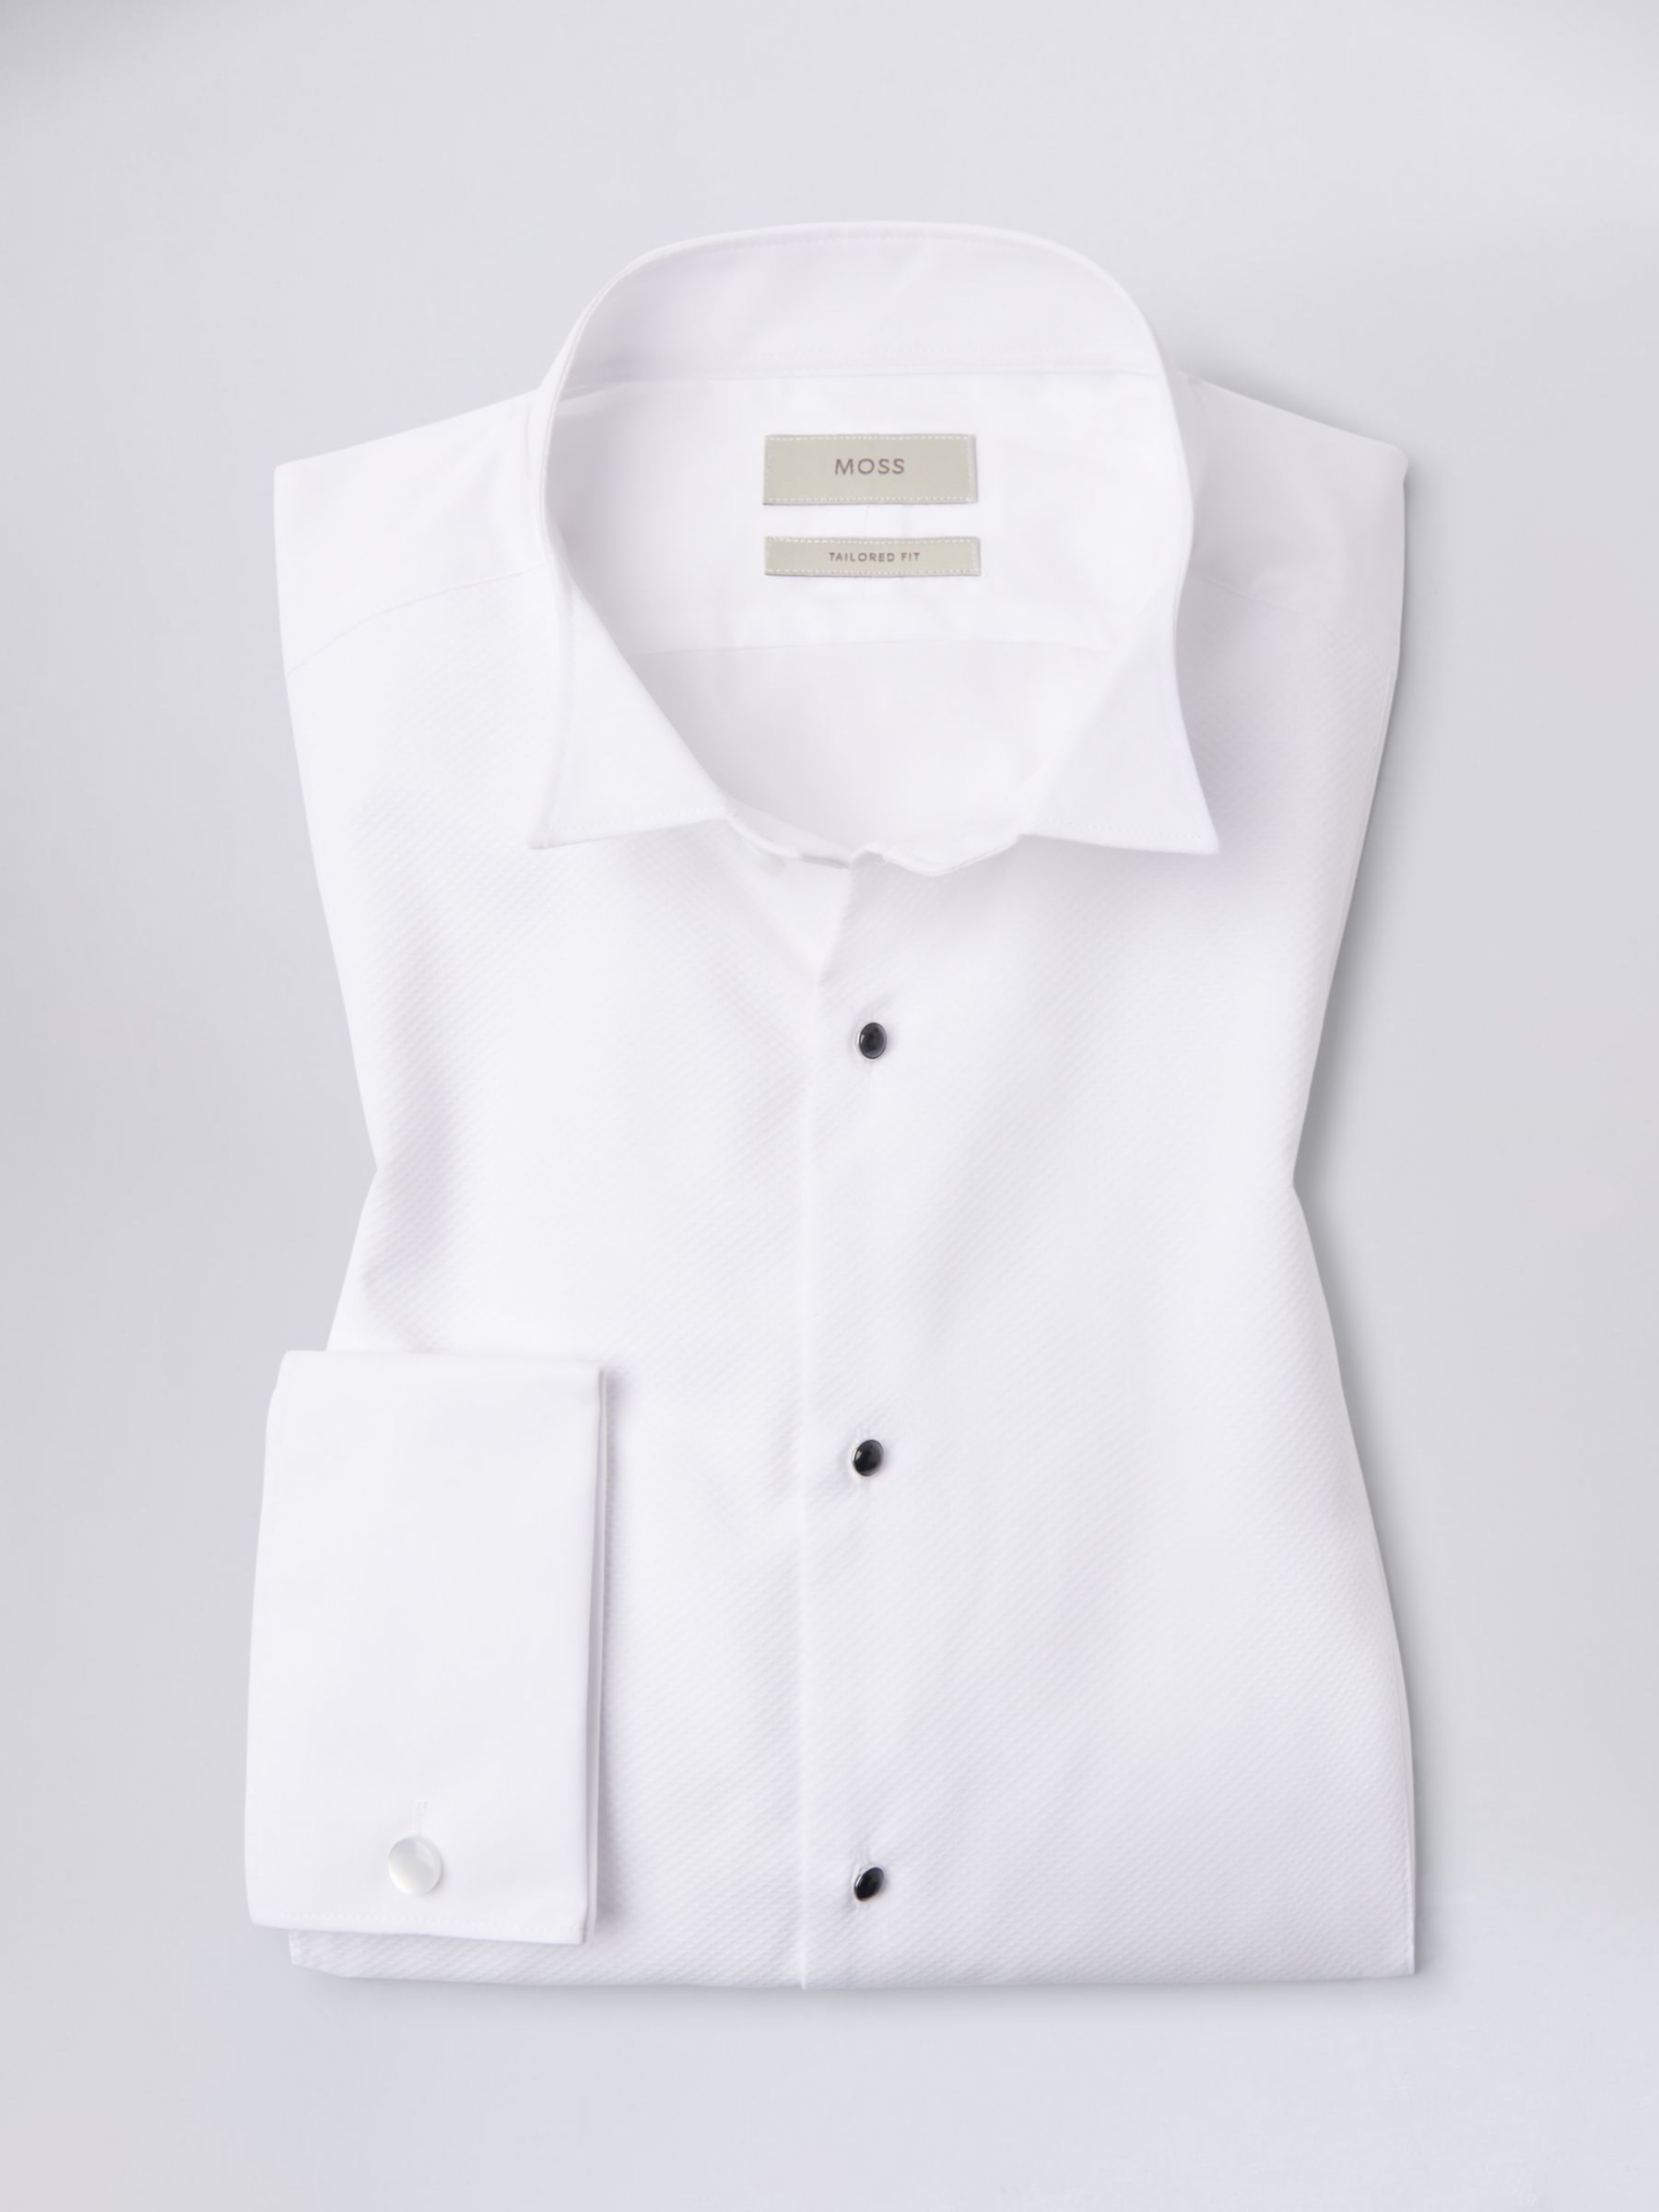 Moss Tailored Marcella Wing Collar Dress Shirt, White, 14